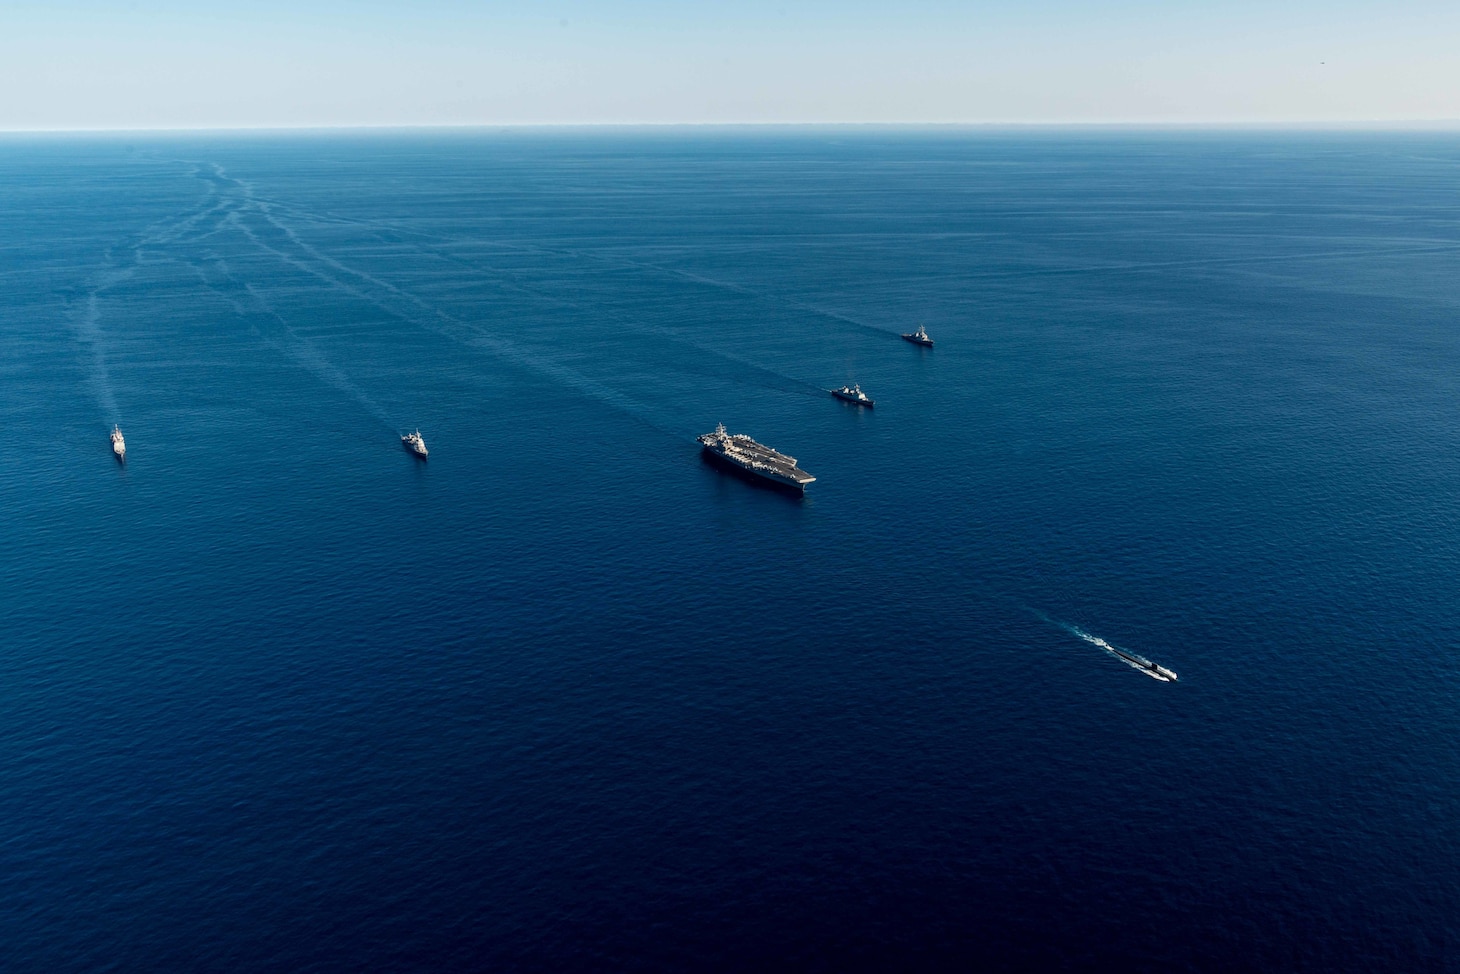 The U.S. Navy’s only forward-deployed aircraft carrier, USS Ronald Reagan (CVN 76), a U.S. Navy Los Angeles-class fast-attack submarine, Ticonderoga-class guided-missile cruiser USS Chancellorsville (CG 62), Arleigh Burke-class guided-missile destroyer USS Benfold (DDG 65), Republic of Korea (ROK) Navy destroyer ROKS Munmu the Great (DDH 976) and Japan Maritime Self-Defense Force (JMSDF) destroyer JS Asahi (DD 119), steam in formation in waters east of the Korean Peninsula, Sept. 30. Ronald Reagan, operating as the flagship of Carrier Strike Group (CSG) 5 is conducting a trilateral anti-submarine warfare exercise with the JMSDF and ROK Navy. The operations between the Reagan Strike Group, JS Asahi, and ROKS Munmu The Great, involved operating with a U.S. submarine to enhance interoperability between the nations in support of a free and open Indo-Pacific.